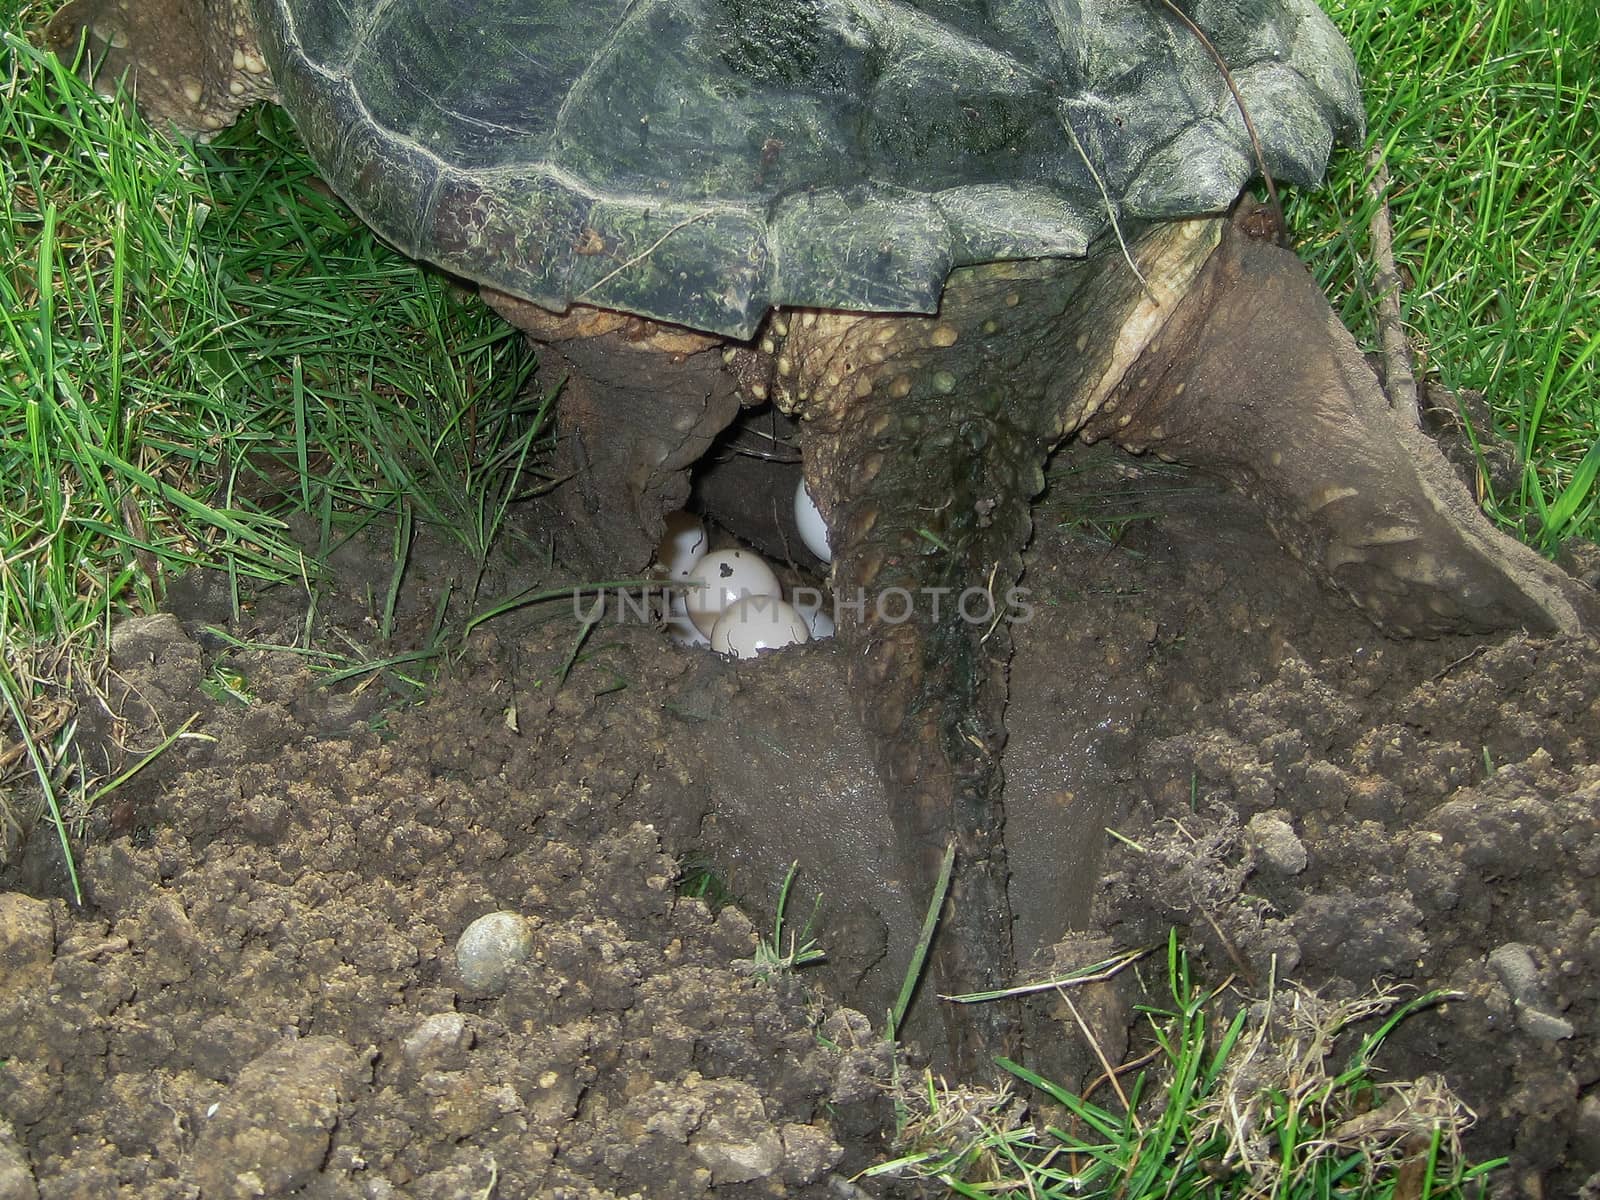 snapping turtle, chelydra s. serpentina, laying eggs by Coffee999